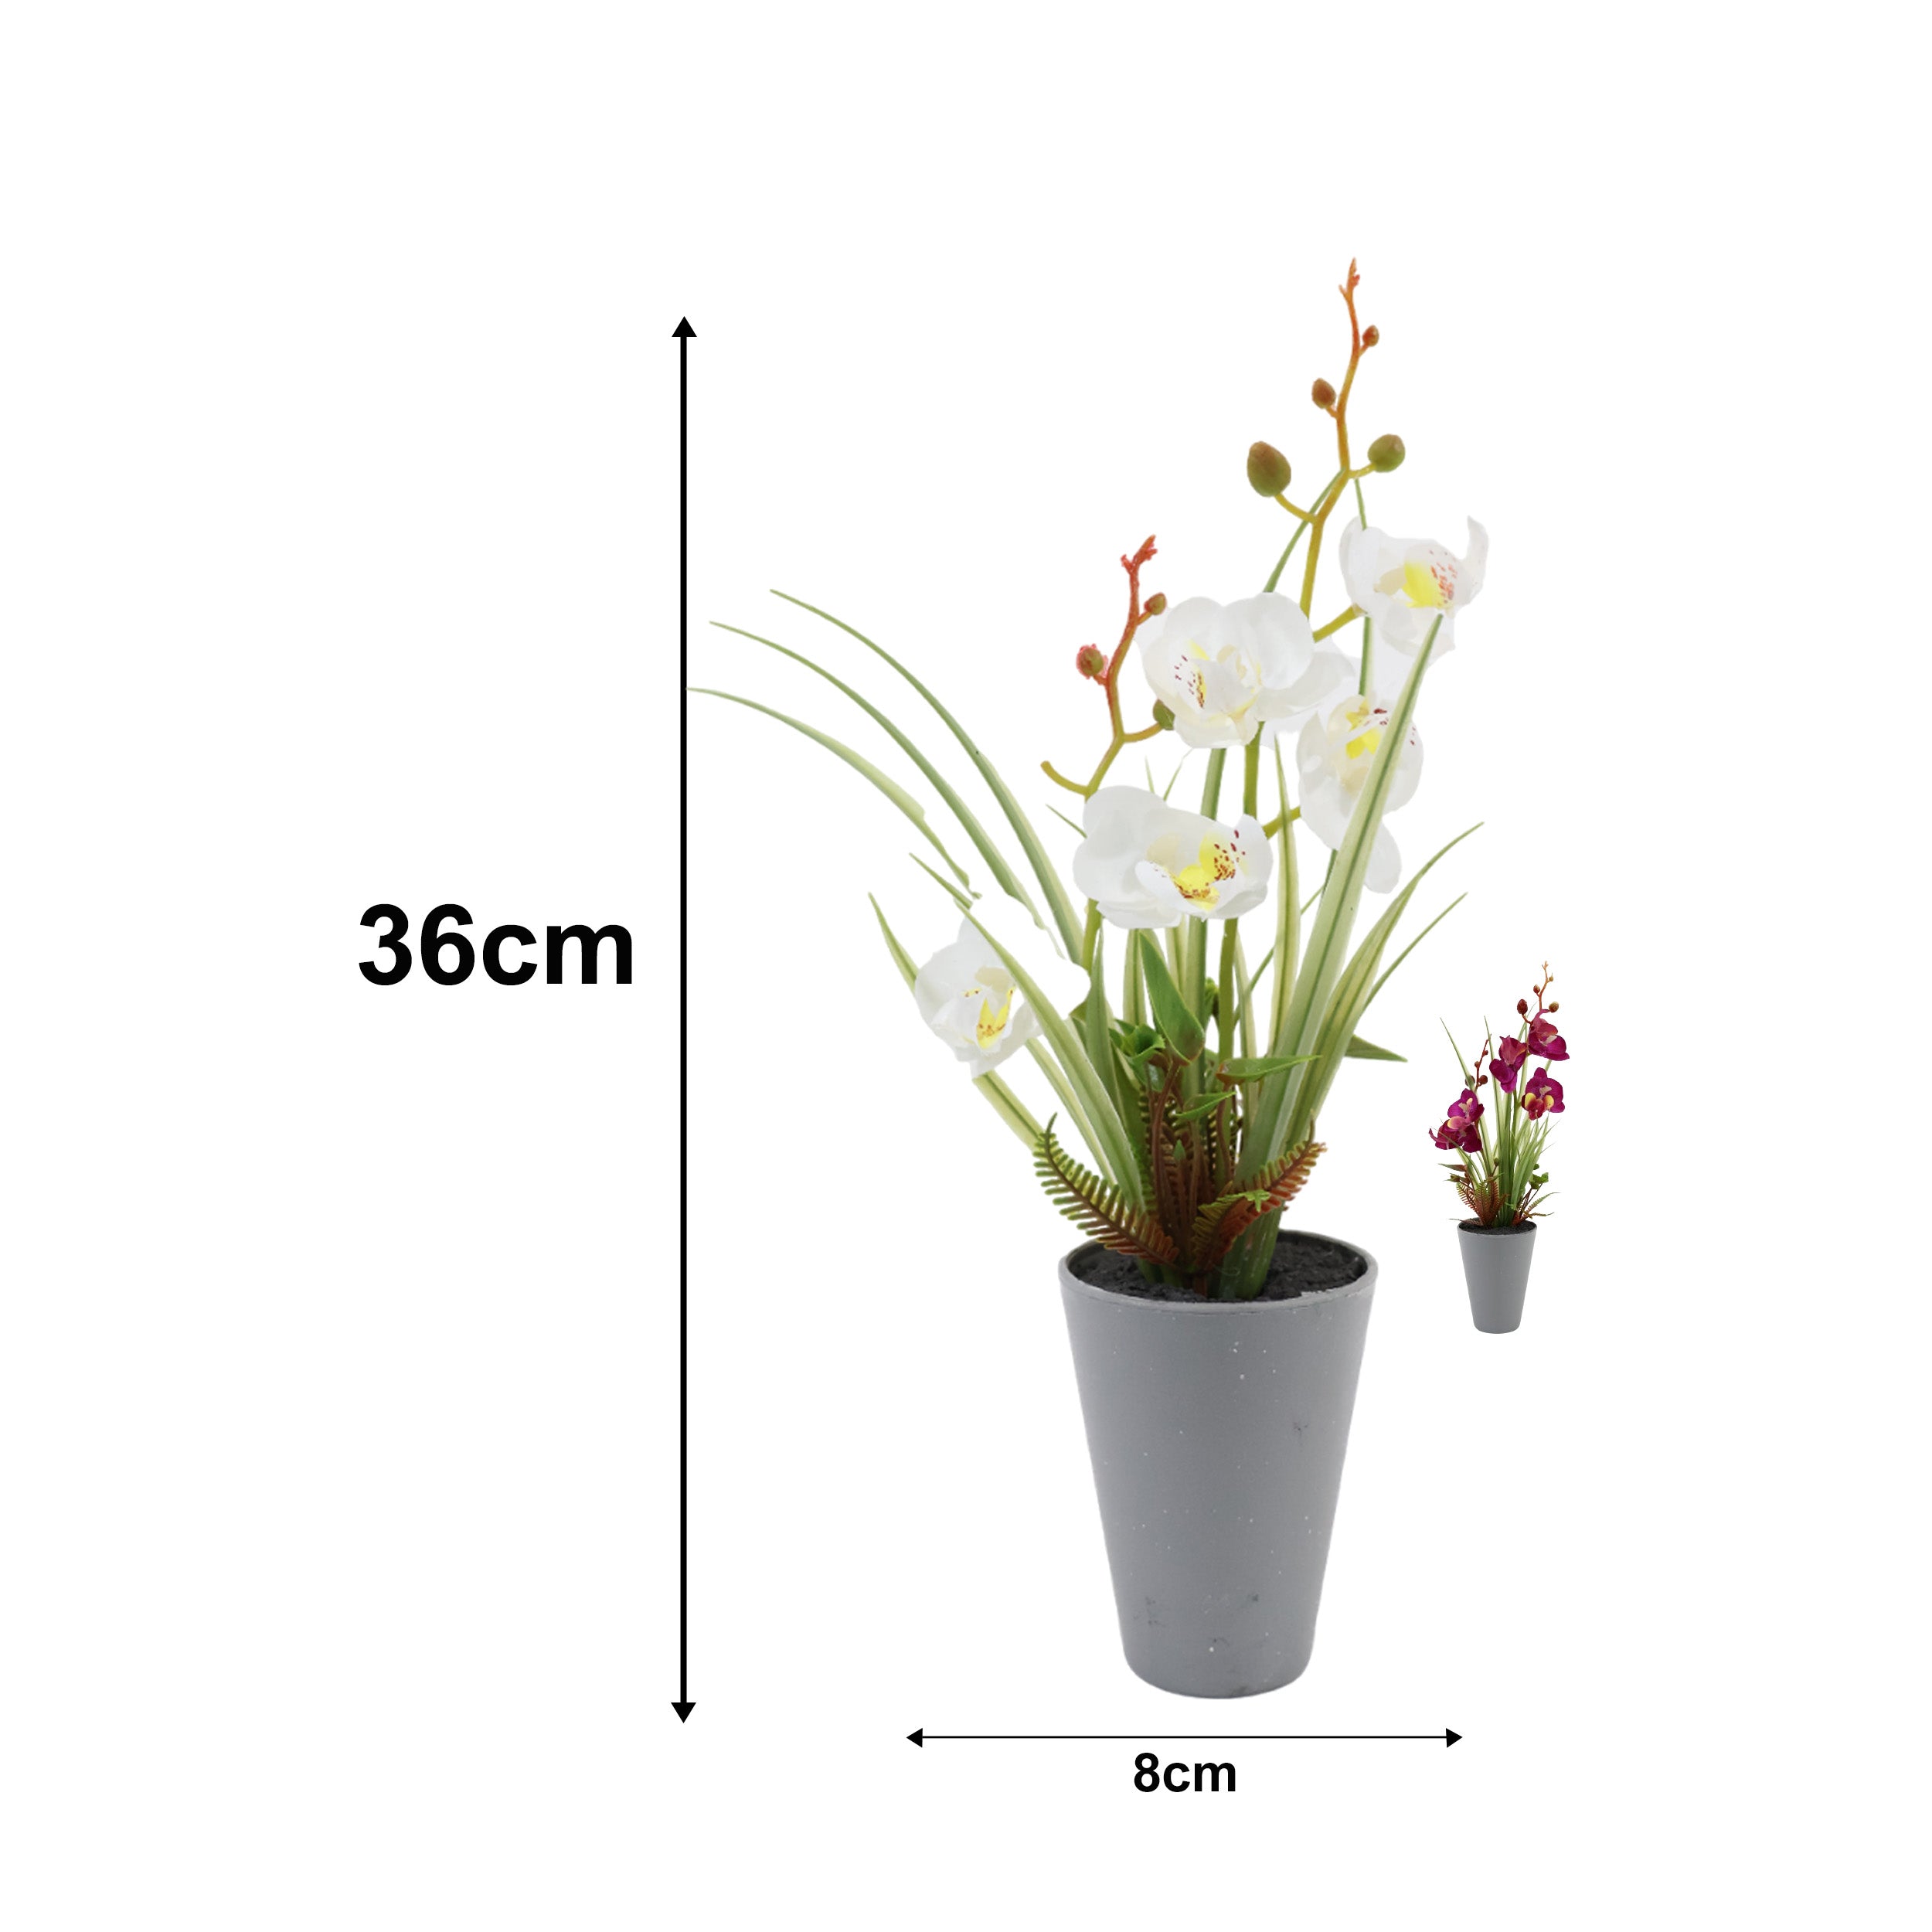 Aavana greens Artificial Bonsai Plant, Orchid Artificial Flowers Plant, Artificial Decorative Plant Home Office Indoor and Outdoor Decoration Option 1